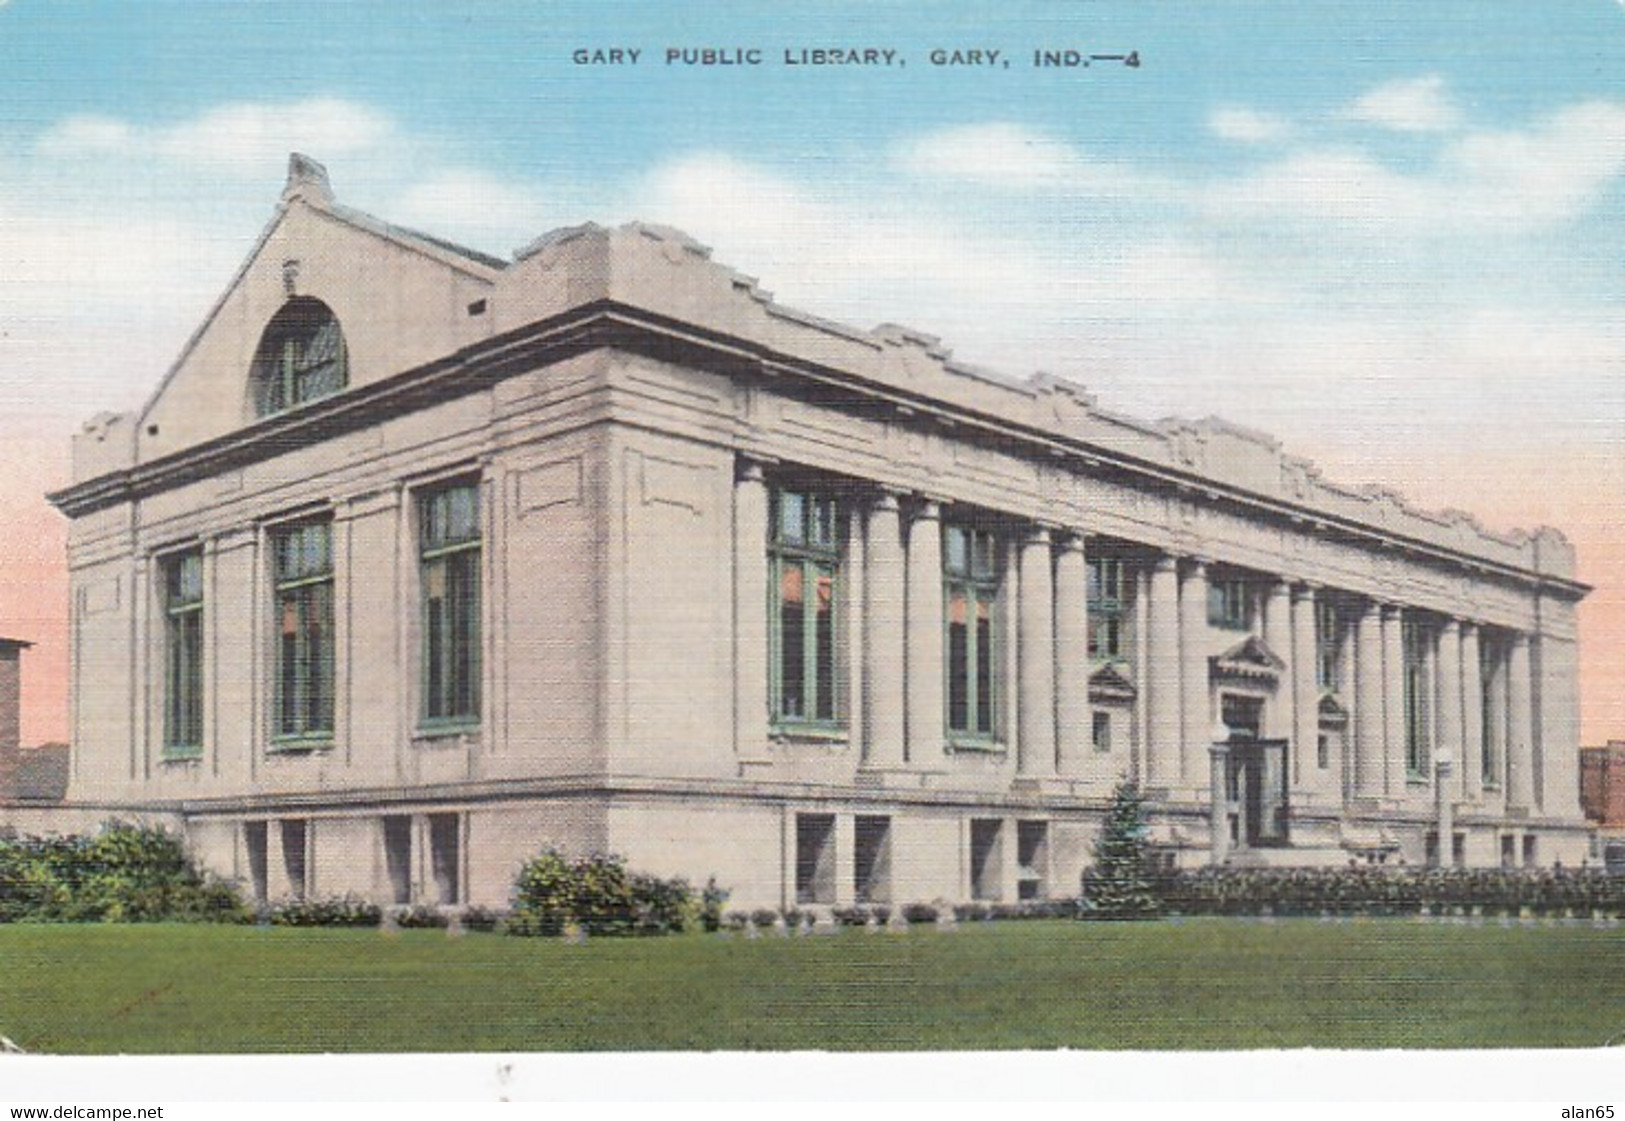 Gary Indiana, Gary Public Library Building Architecture, C1930s Vintage Postcard - Libraries